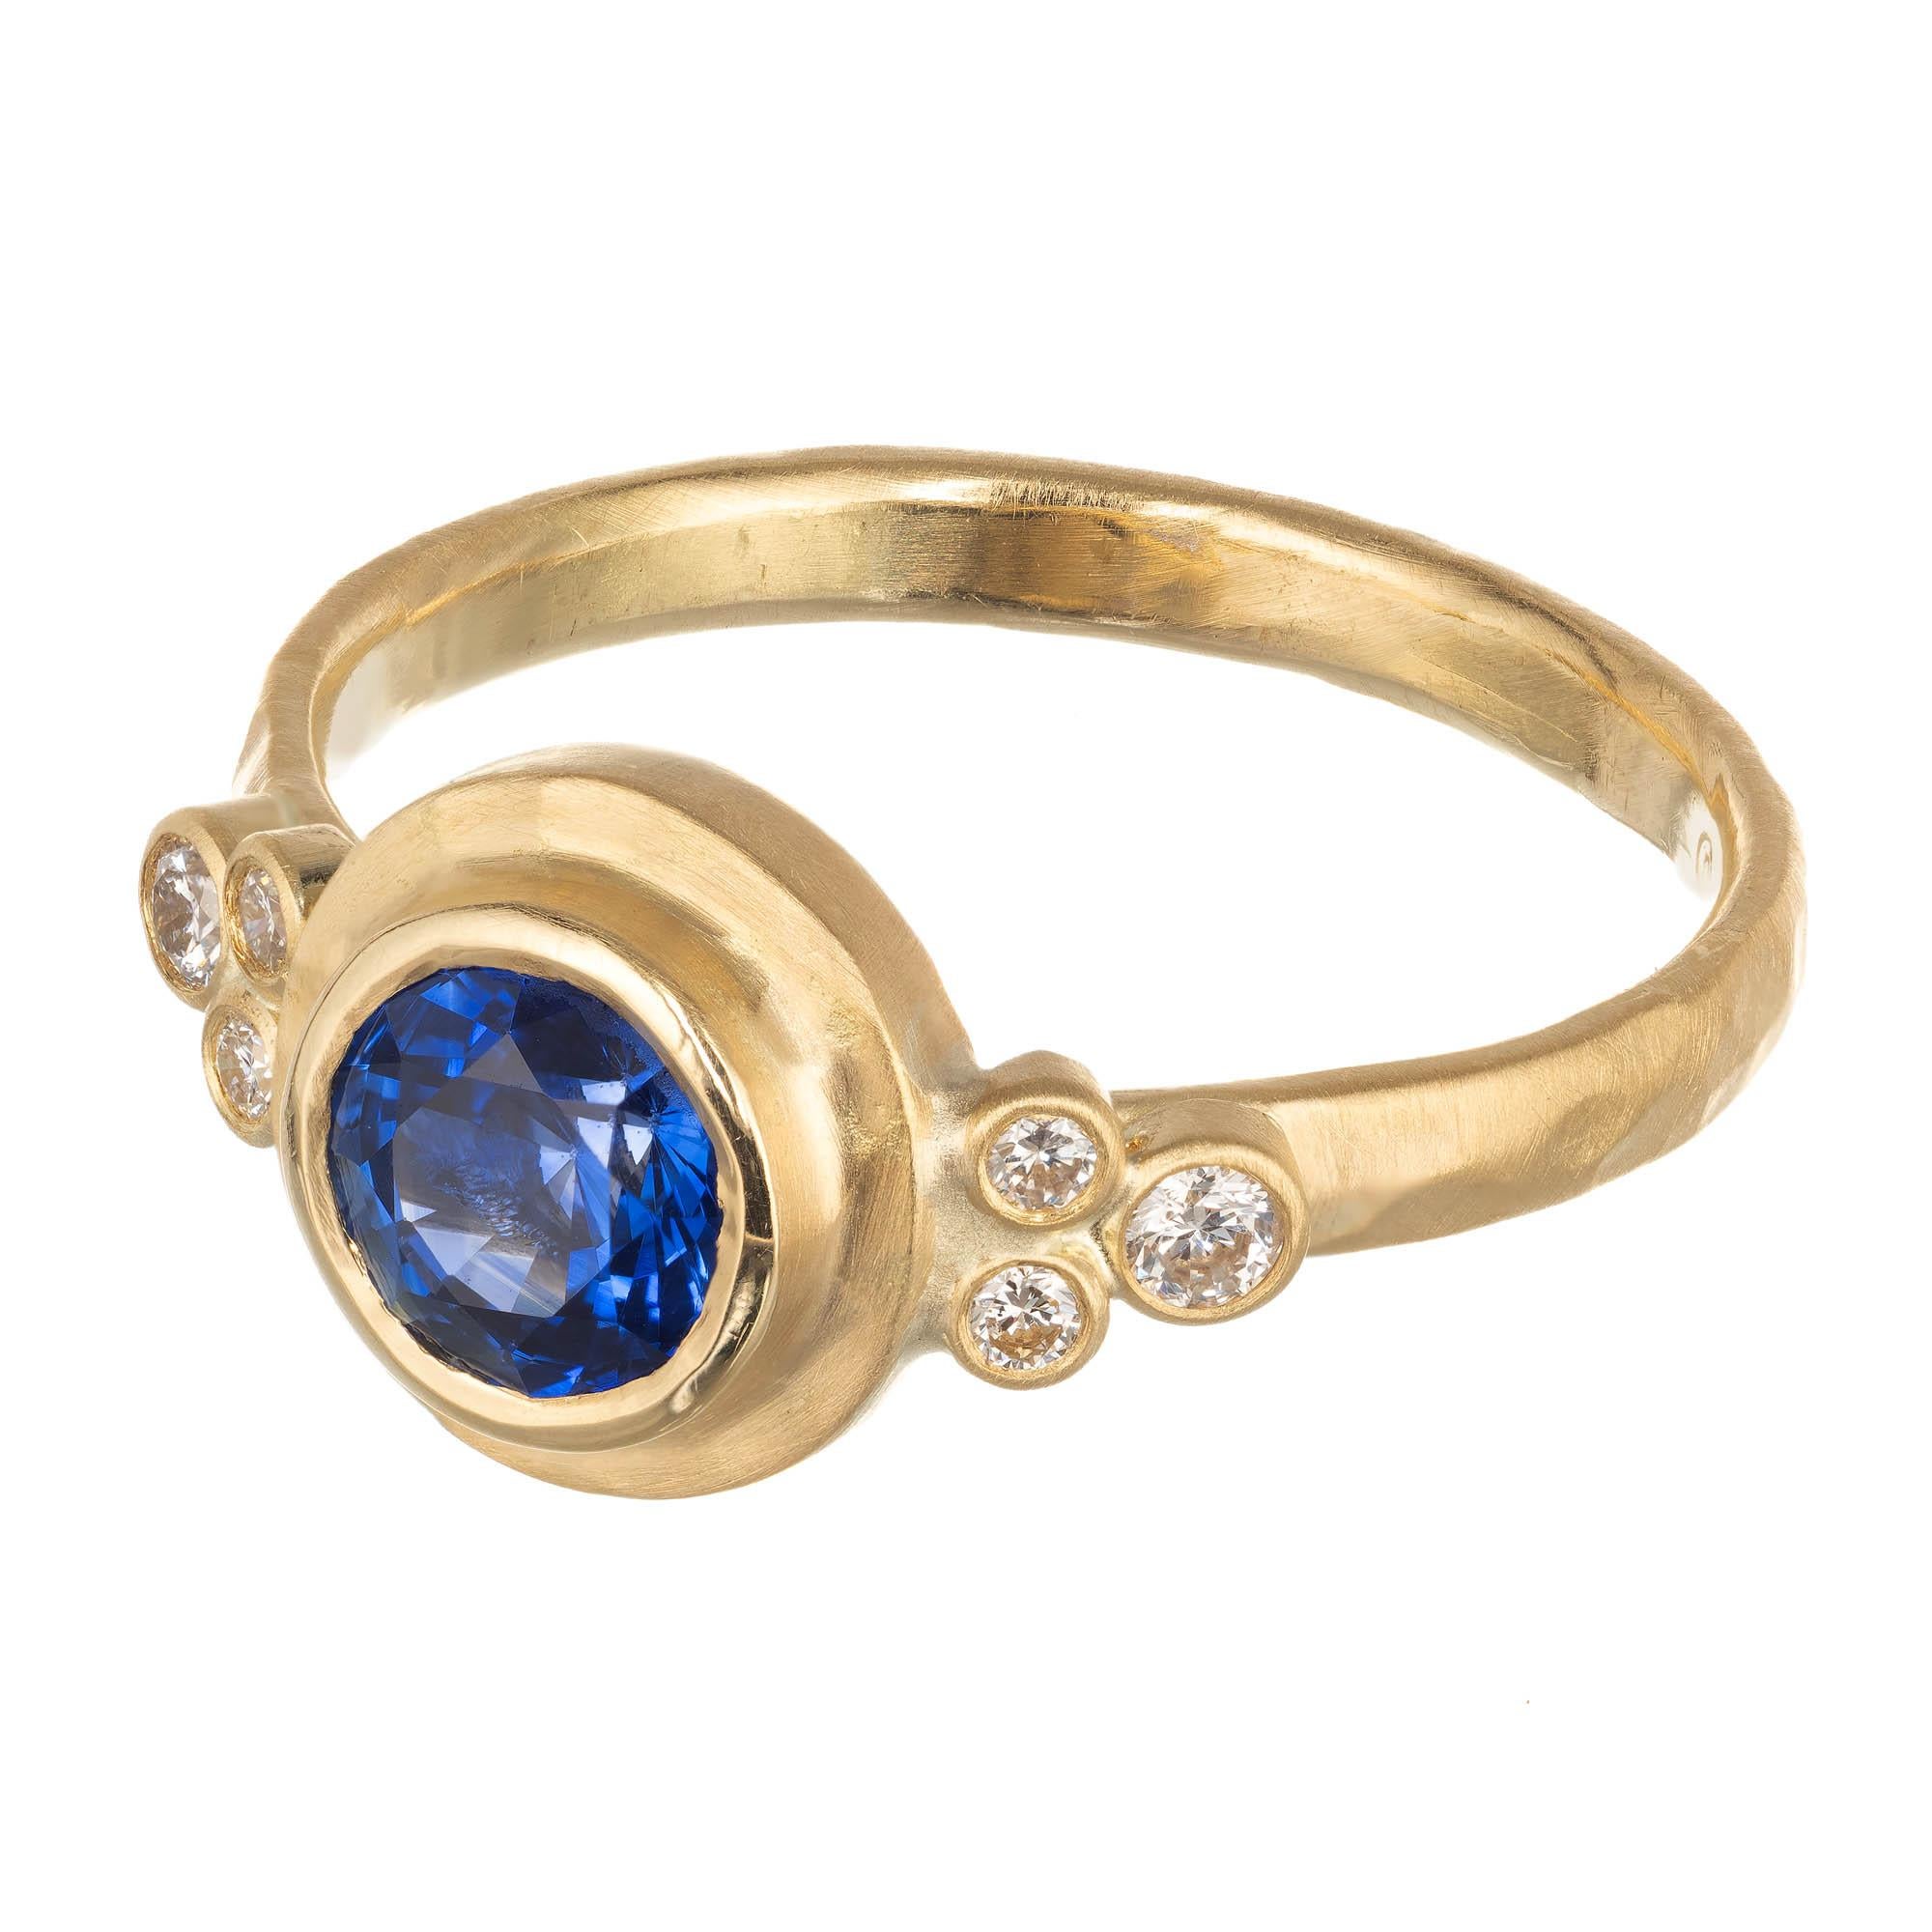 Peter Suchy sapphire and diamond hammered engagement ring. Center sapphire is bezel set with a hammered halo design. 3 diamonds set on the each side of the 18k yellow gold setting. The entire setting is hammered design in the Peter Suchy Workshop,